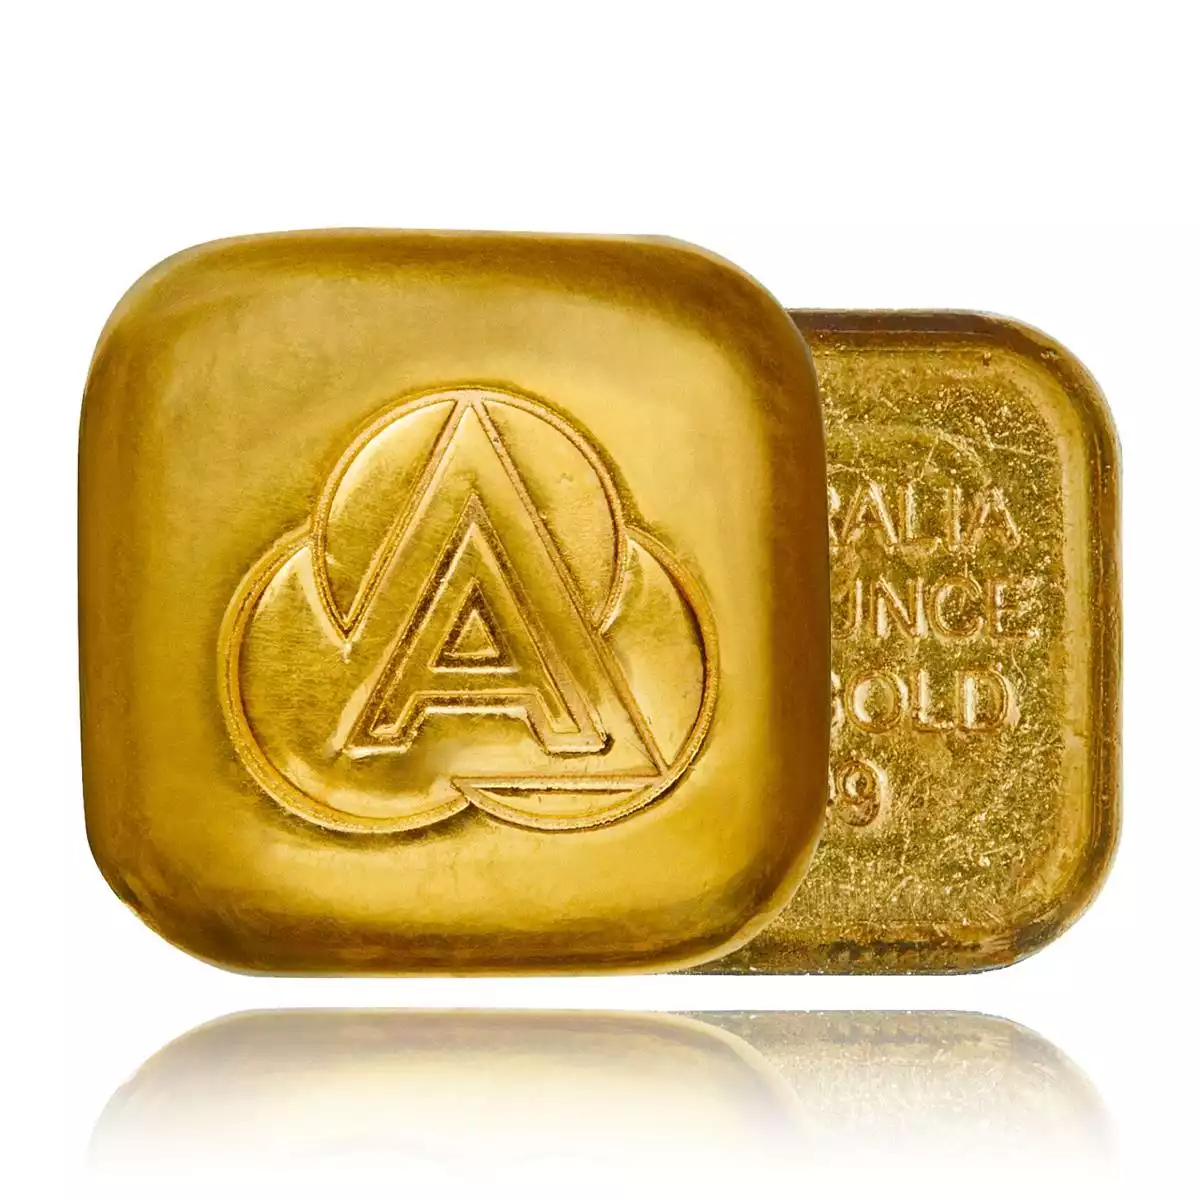 the 1oz ainslie gold bar.our most popular gold bar, the 1oz ainslie gold bar represents the standard unit for many investors. since the birth of curre...